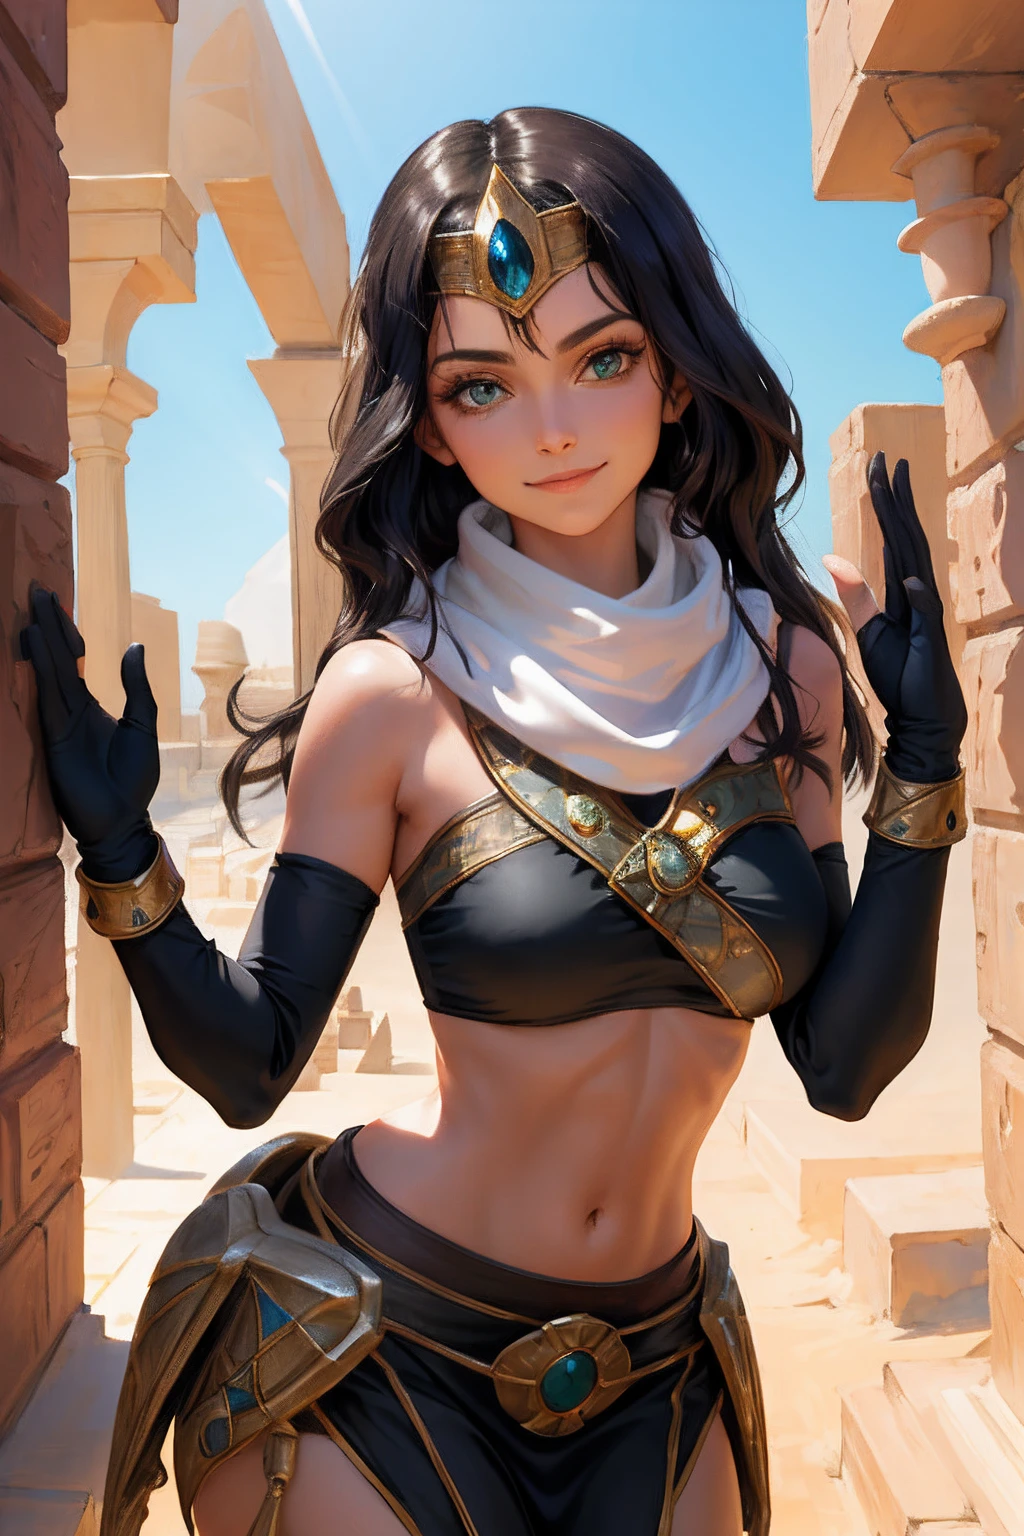 Masterpiece, Best quality, Sewell, circle of the crone, White scarf, Bandeau, mitts, Pelvic curtain, Upper body, Shiny skin, Large breasts, view the viewer, furrowed brows, Smile, Leaning forward, Desert, Egyptian architecture